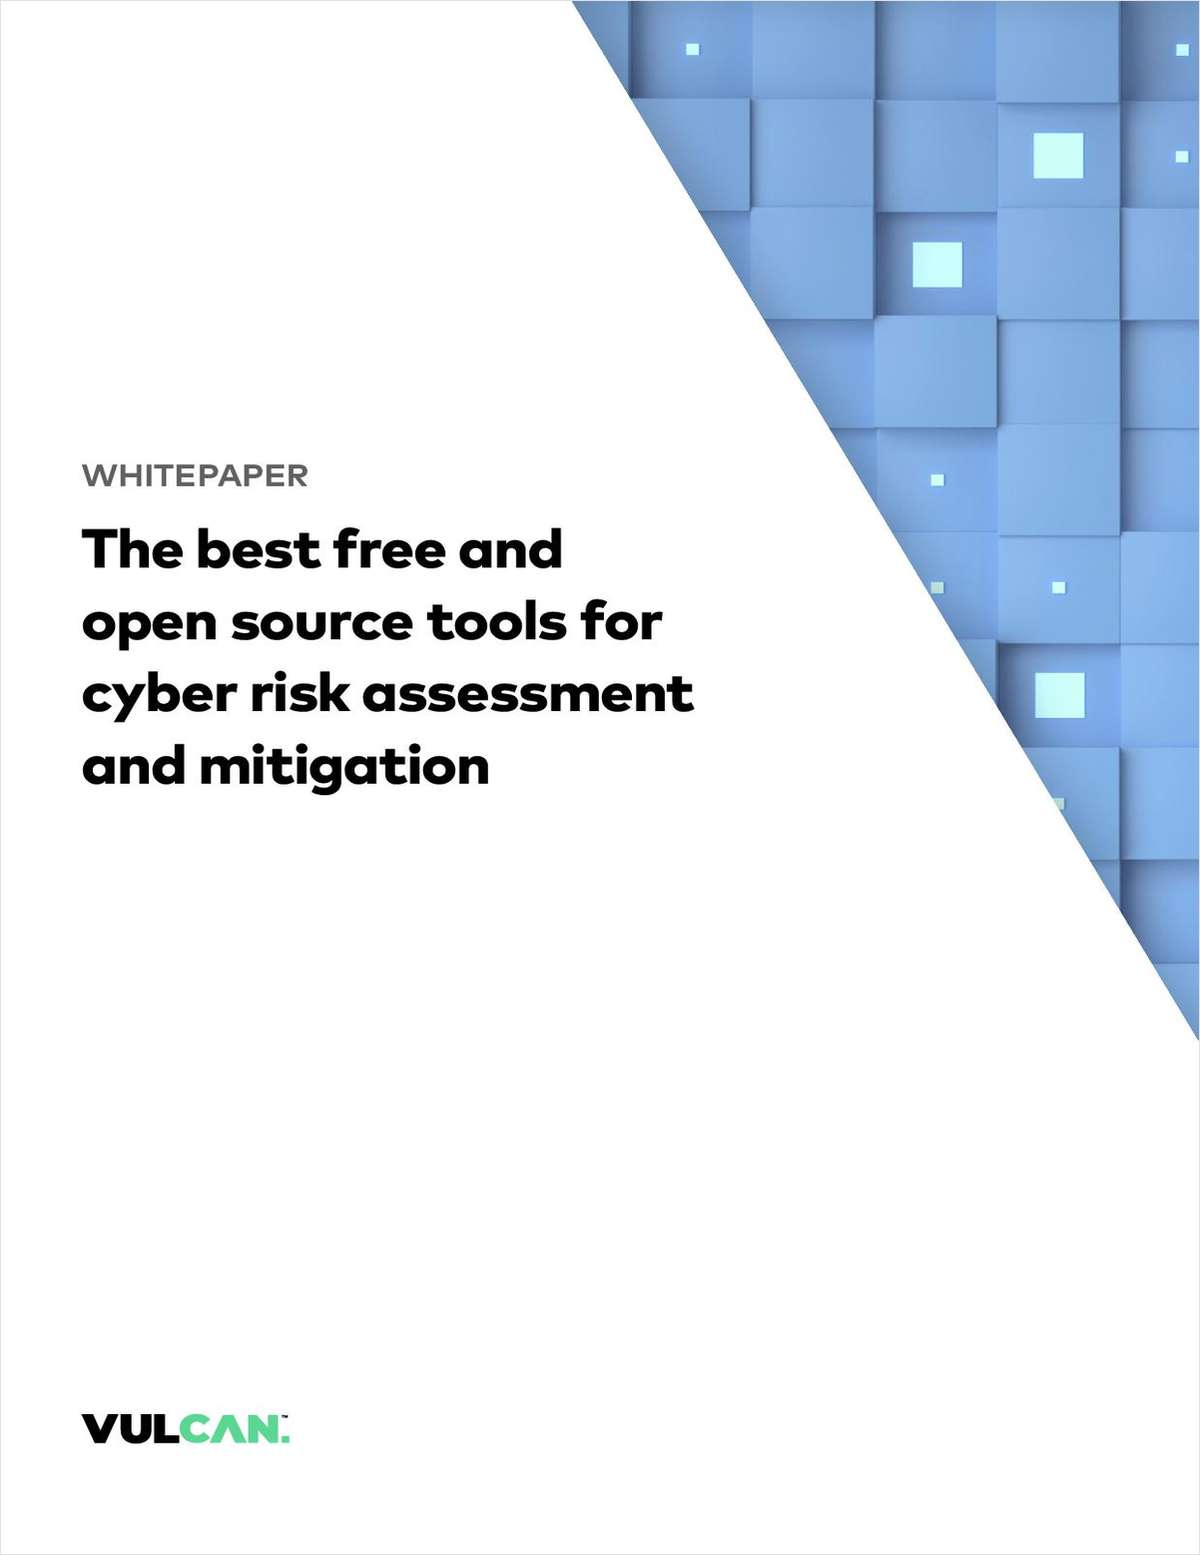 The Best Free and Open Source Tools for Cyber Risk Assessment and Mitigation